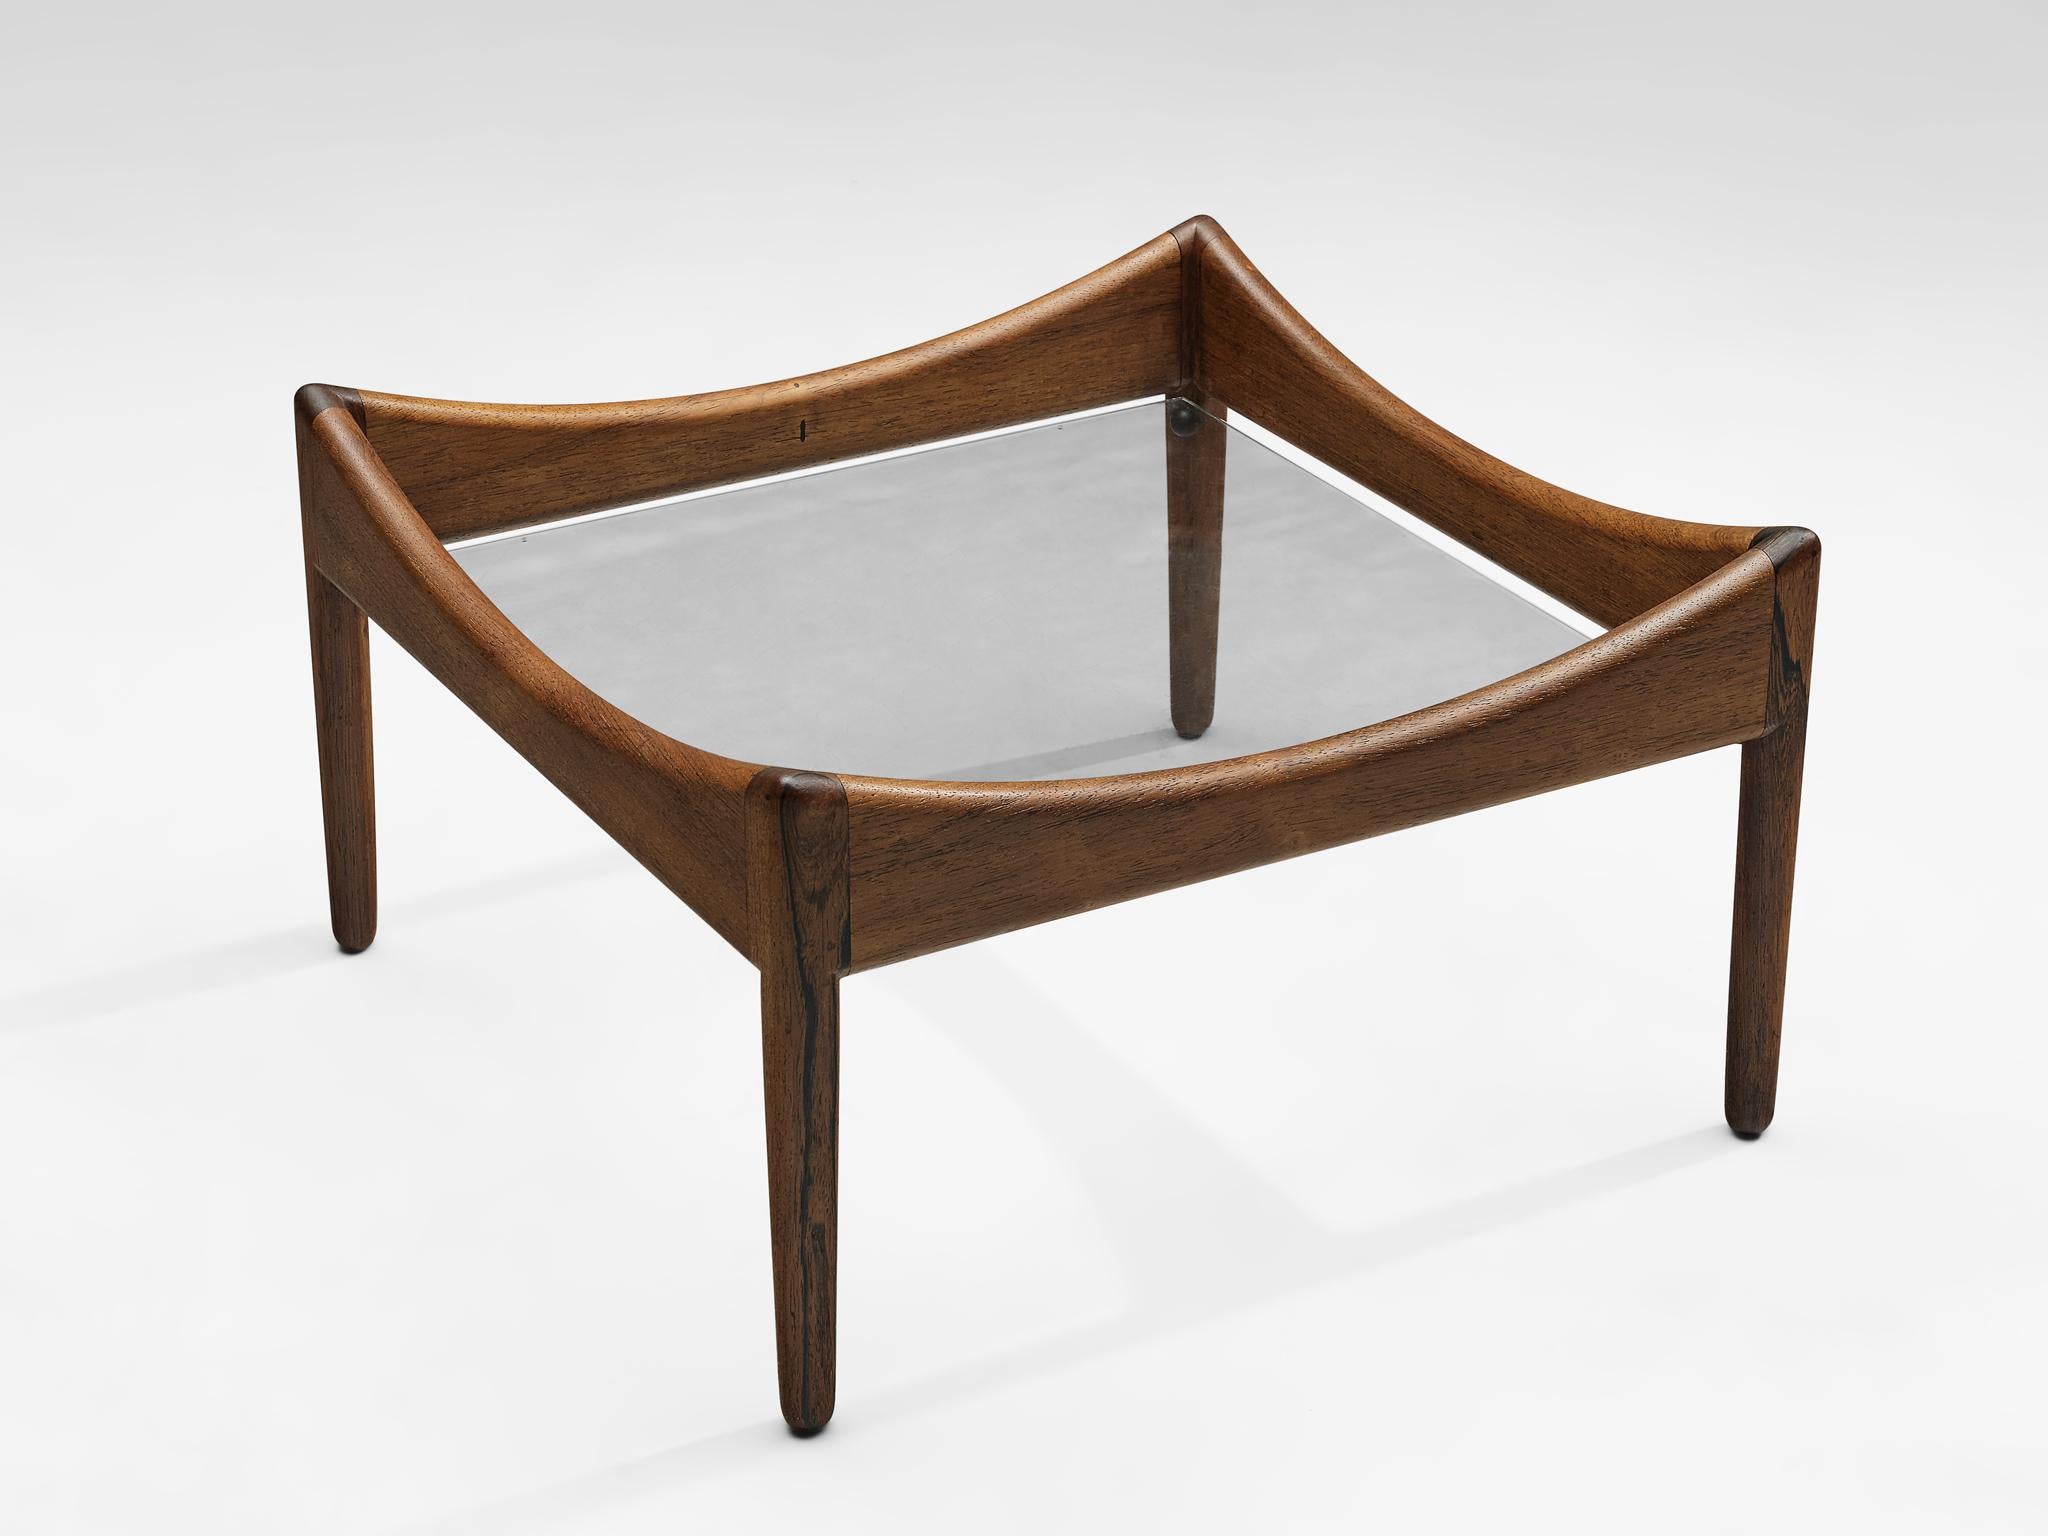 Kristian Solmer Vedel for Søren Willadsen, ‘Modus’ side table, rosewood and glass, Denmark, 1960s. 

A rosewood, steel and glass coffee table designed as part of the Modus range of furniture by Kristian Vedel, produced by Soren Willadsen, Denmark.